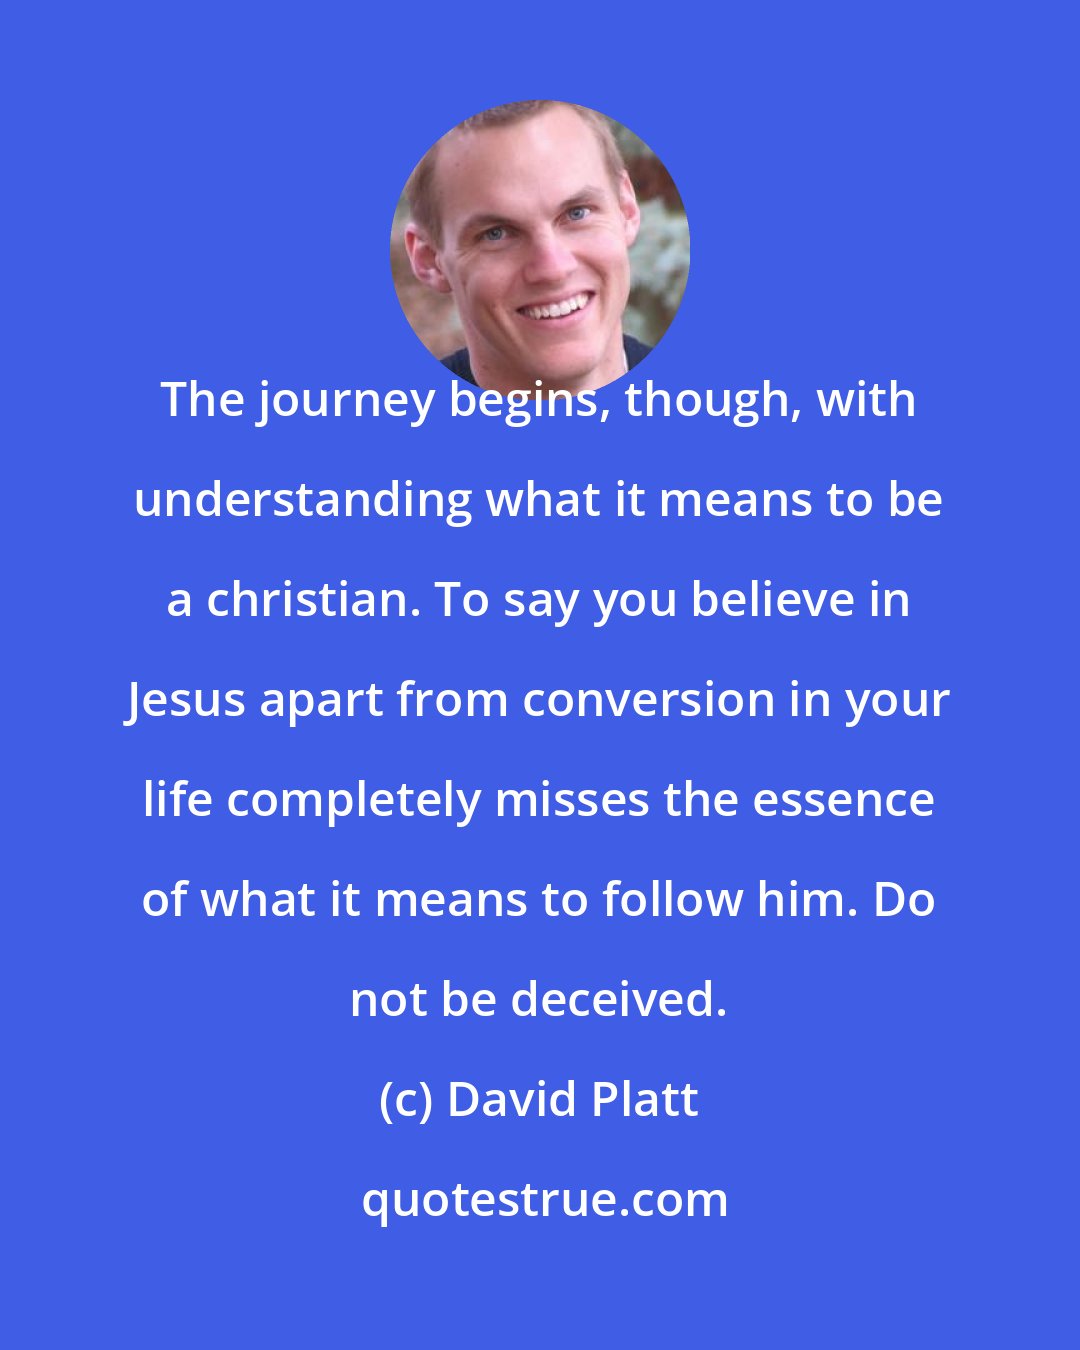 David Platt: The journey begins, though, with understanding what it means to be a christian. To say you believe in Jesus apart from conversion in your life completely misses the essence of what it means to follow him. Do not be deceived.